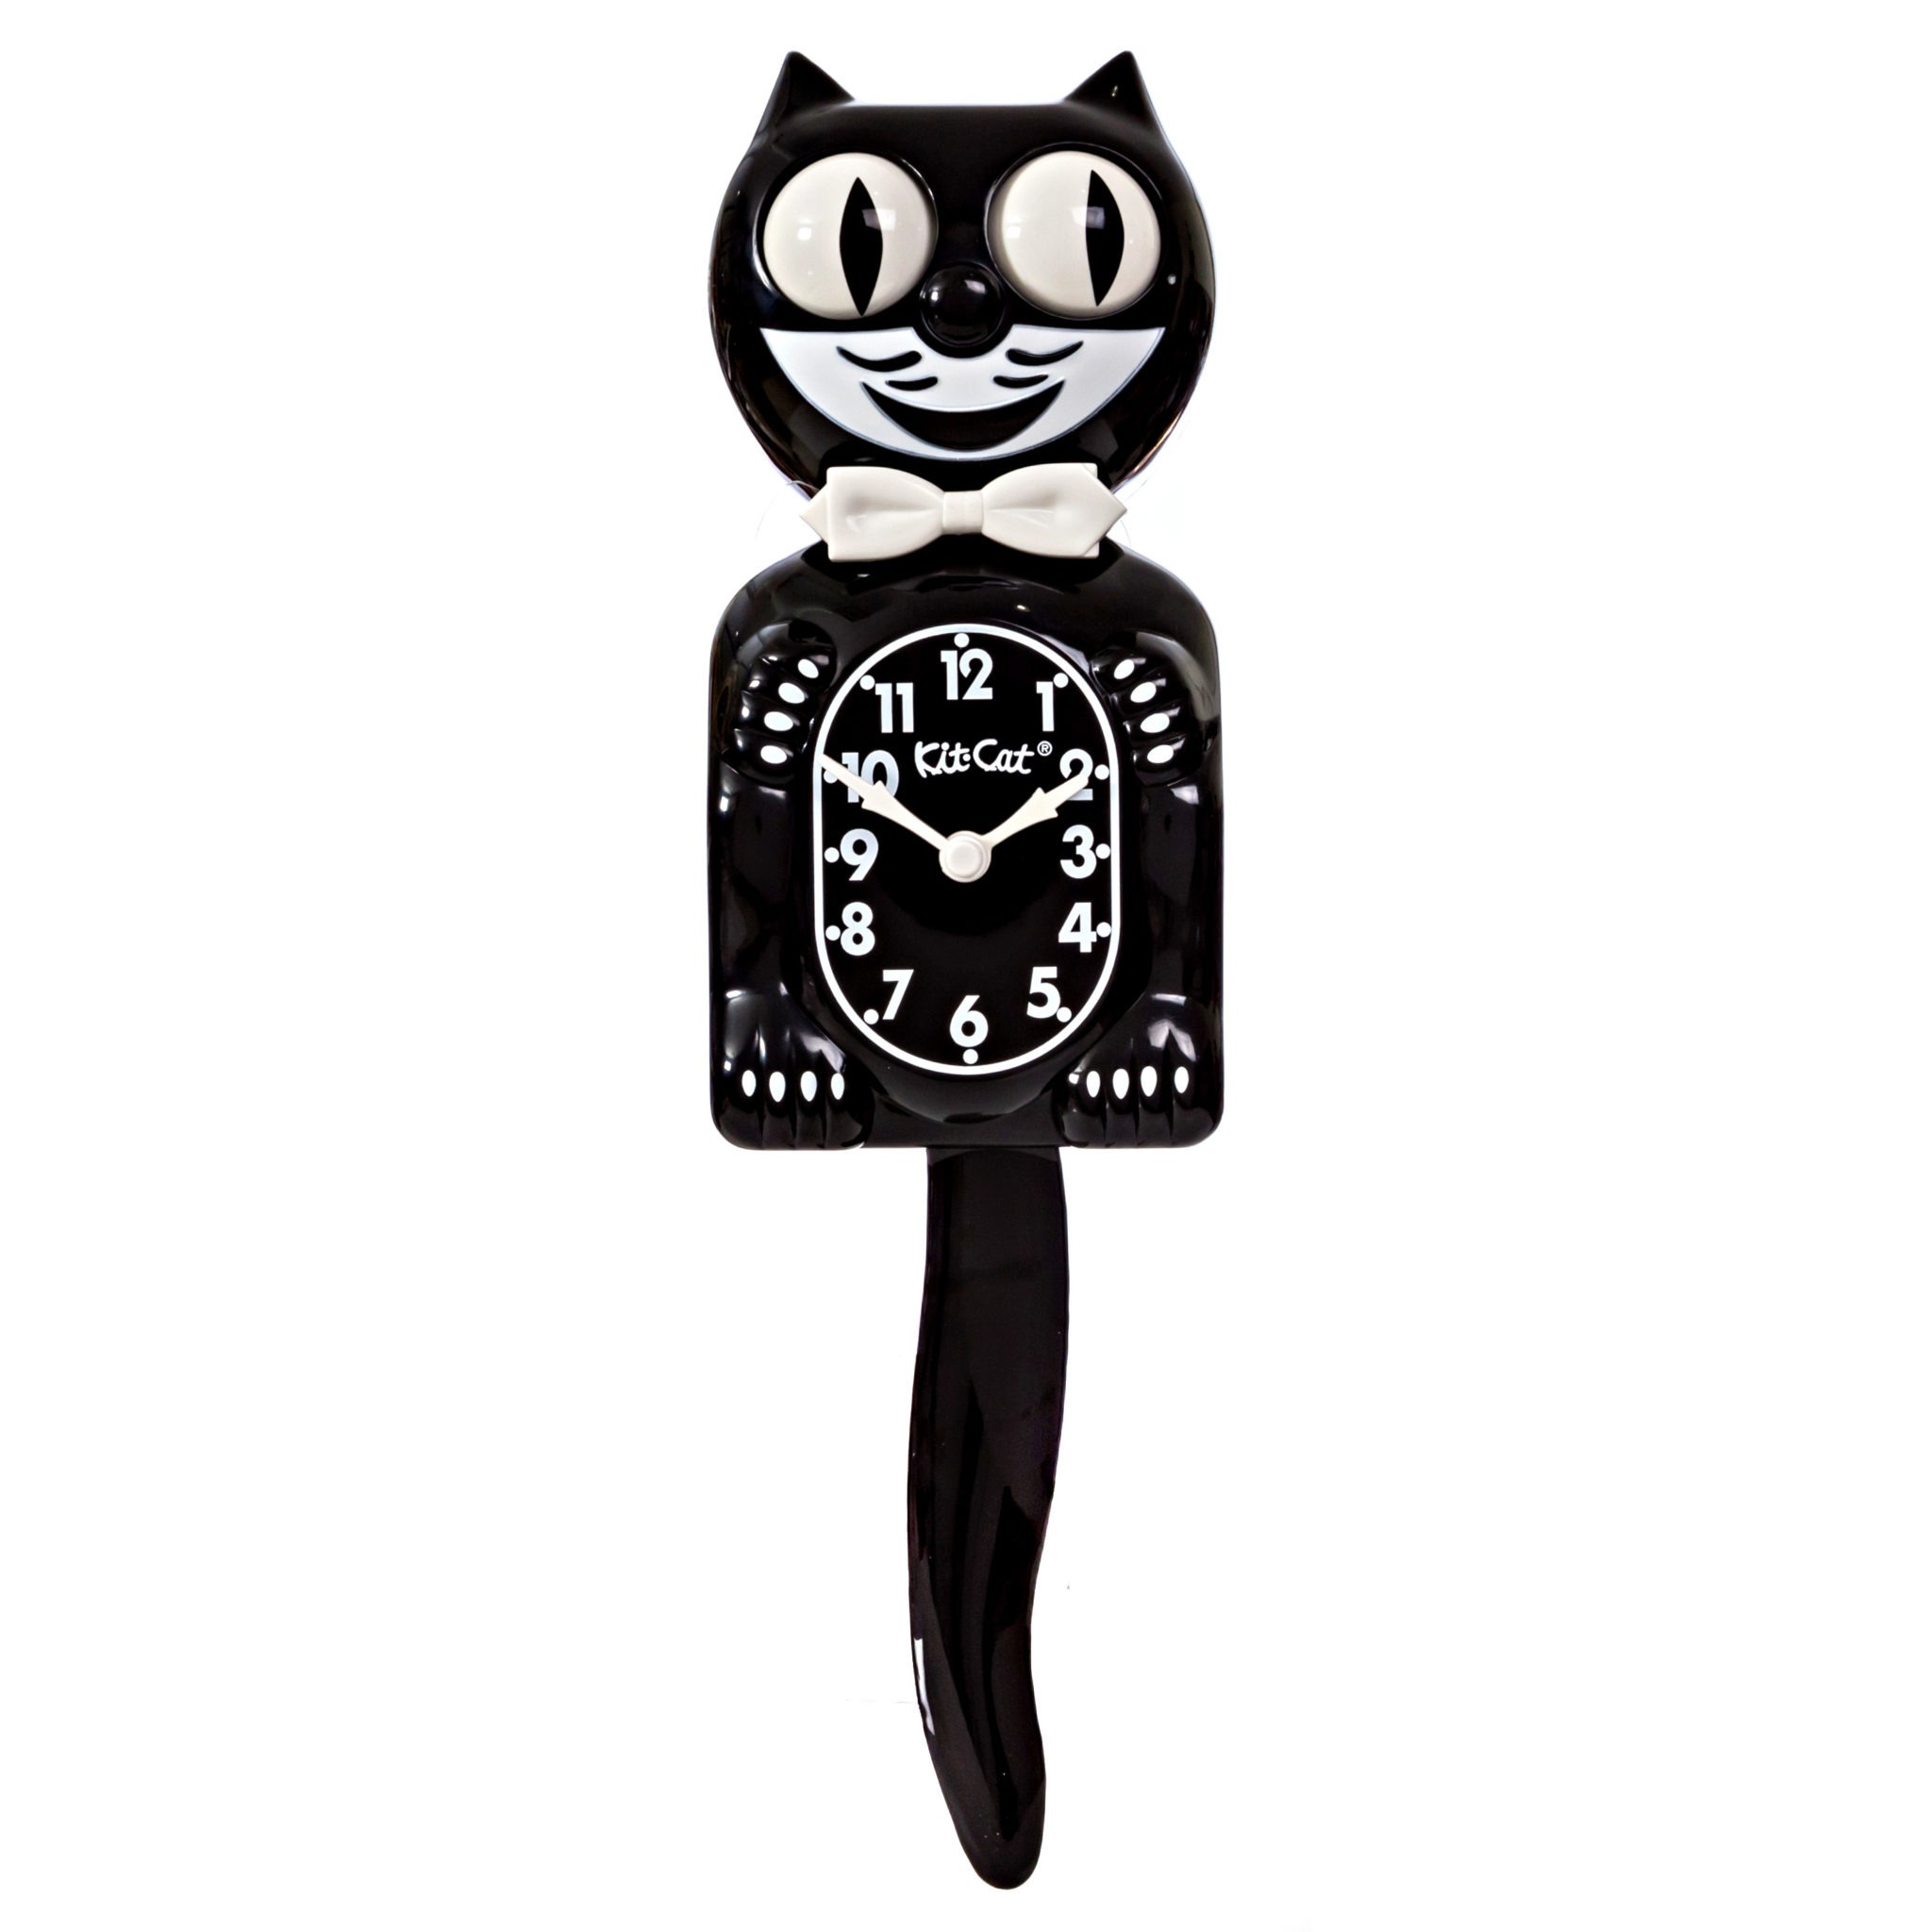 CLASSIC BLACK KIT CAT CLOCK 15.5" Free Battery MADE IN USA Official Klock NEW 